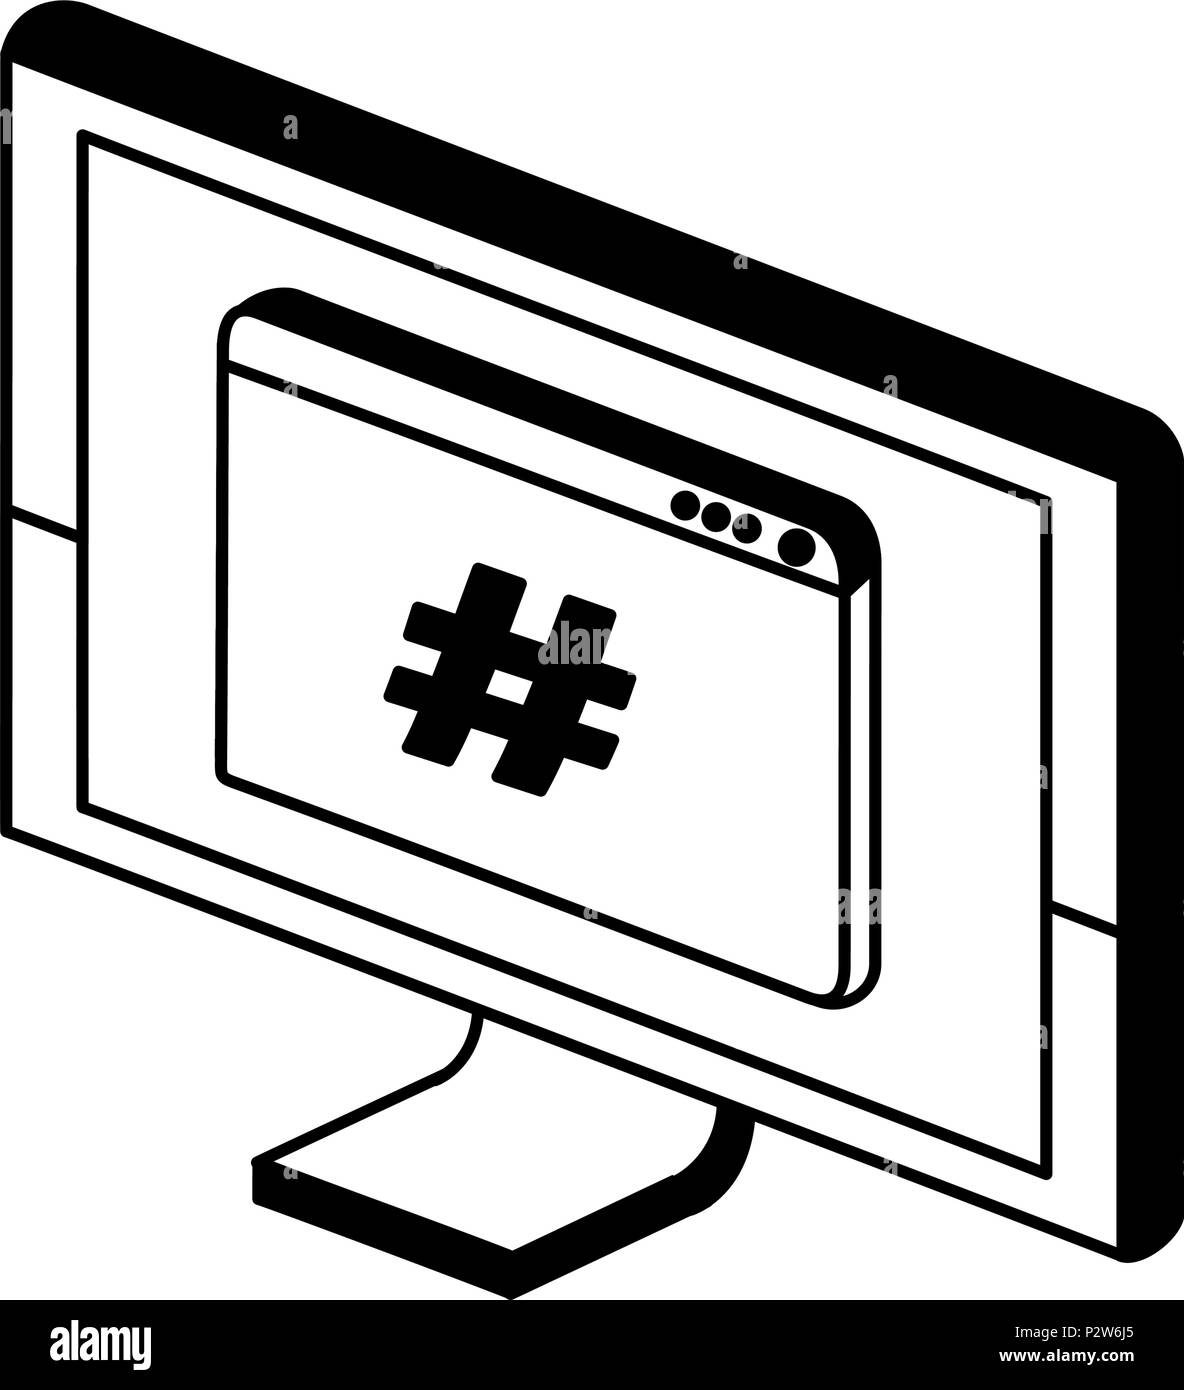 Computer and programming code in black and white Stock Vector